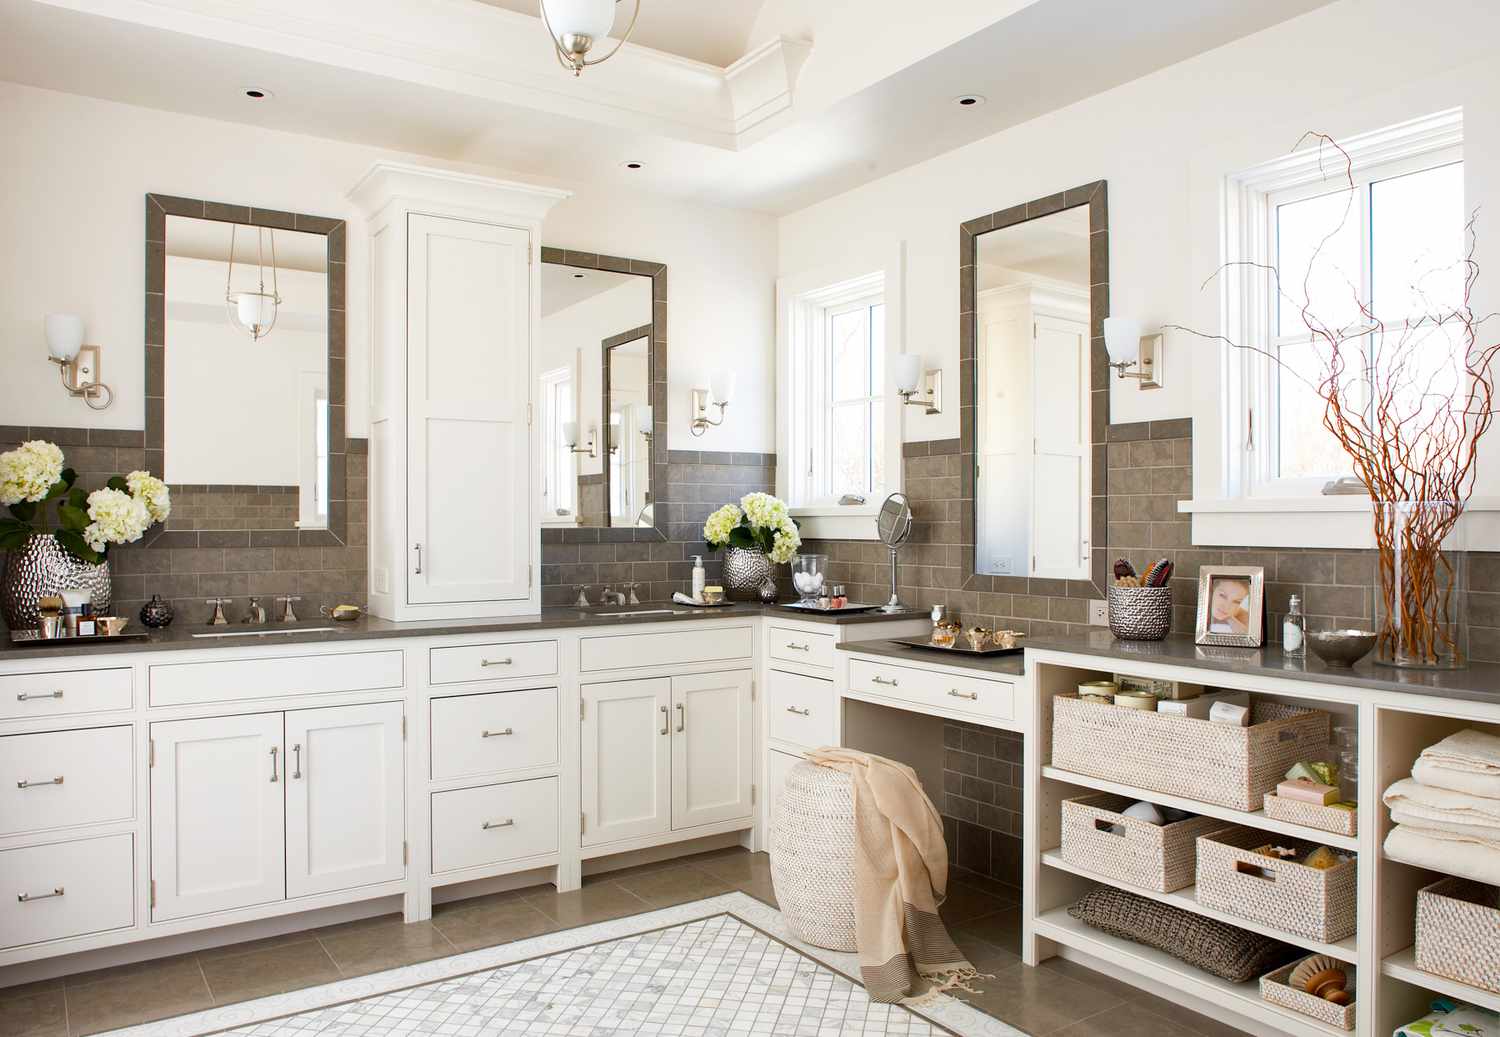 wide view of gray and white bathroom vanity